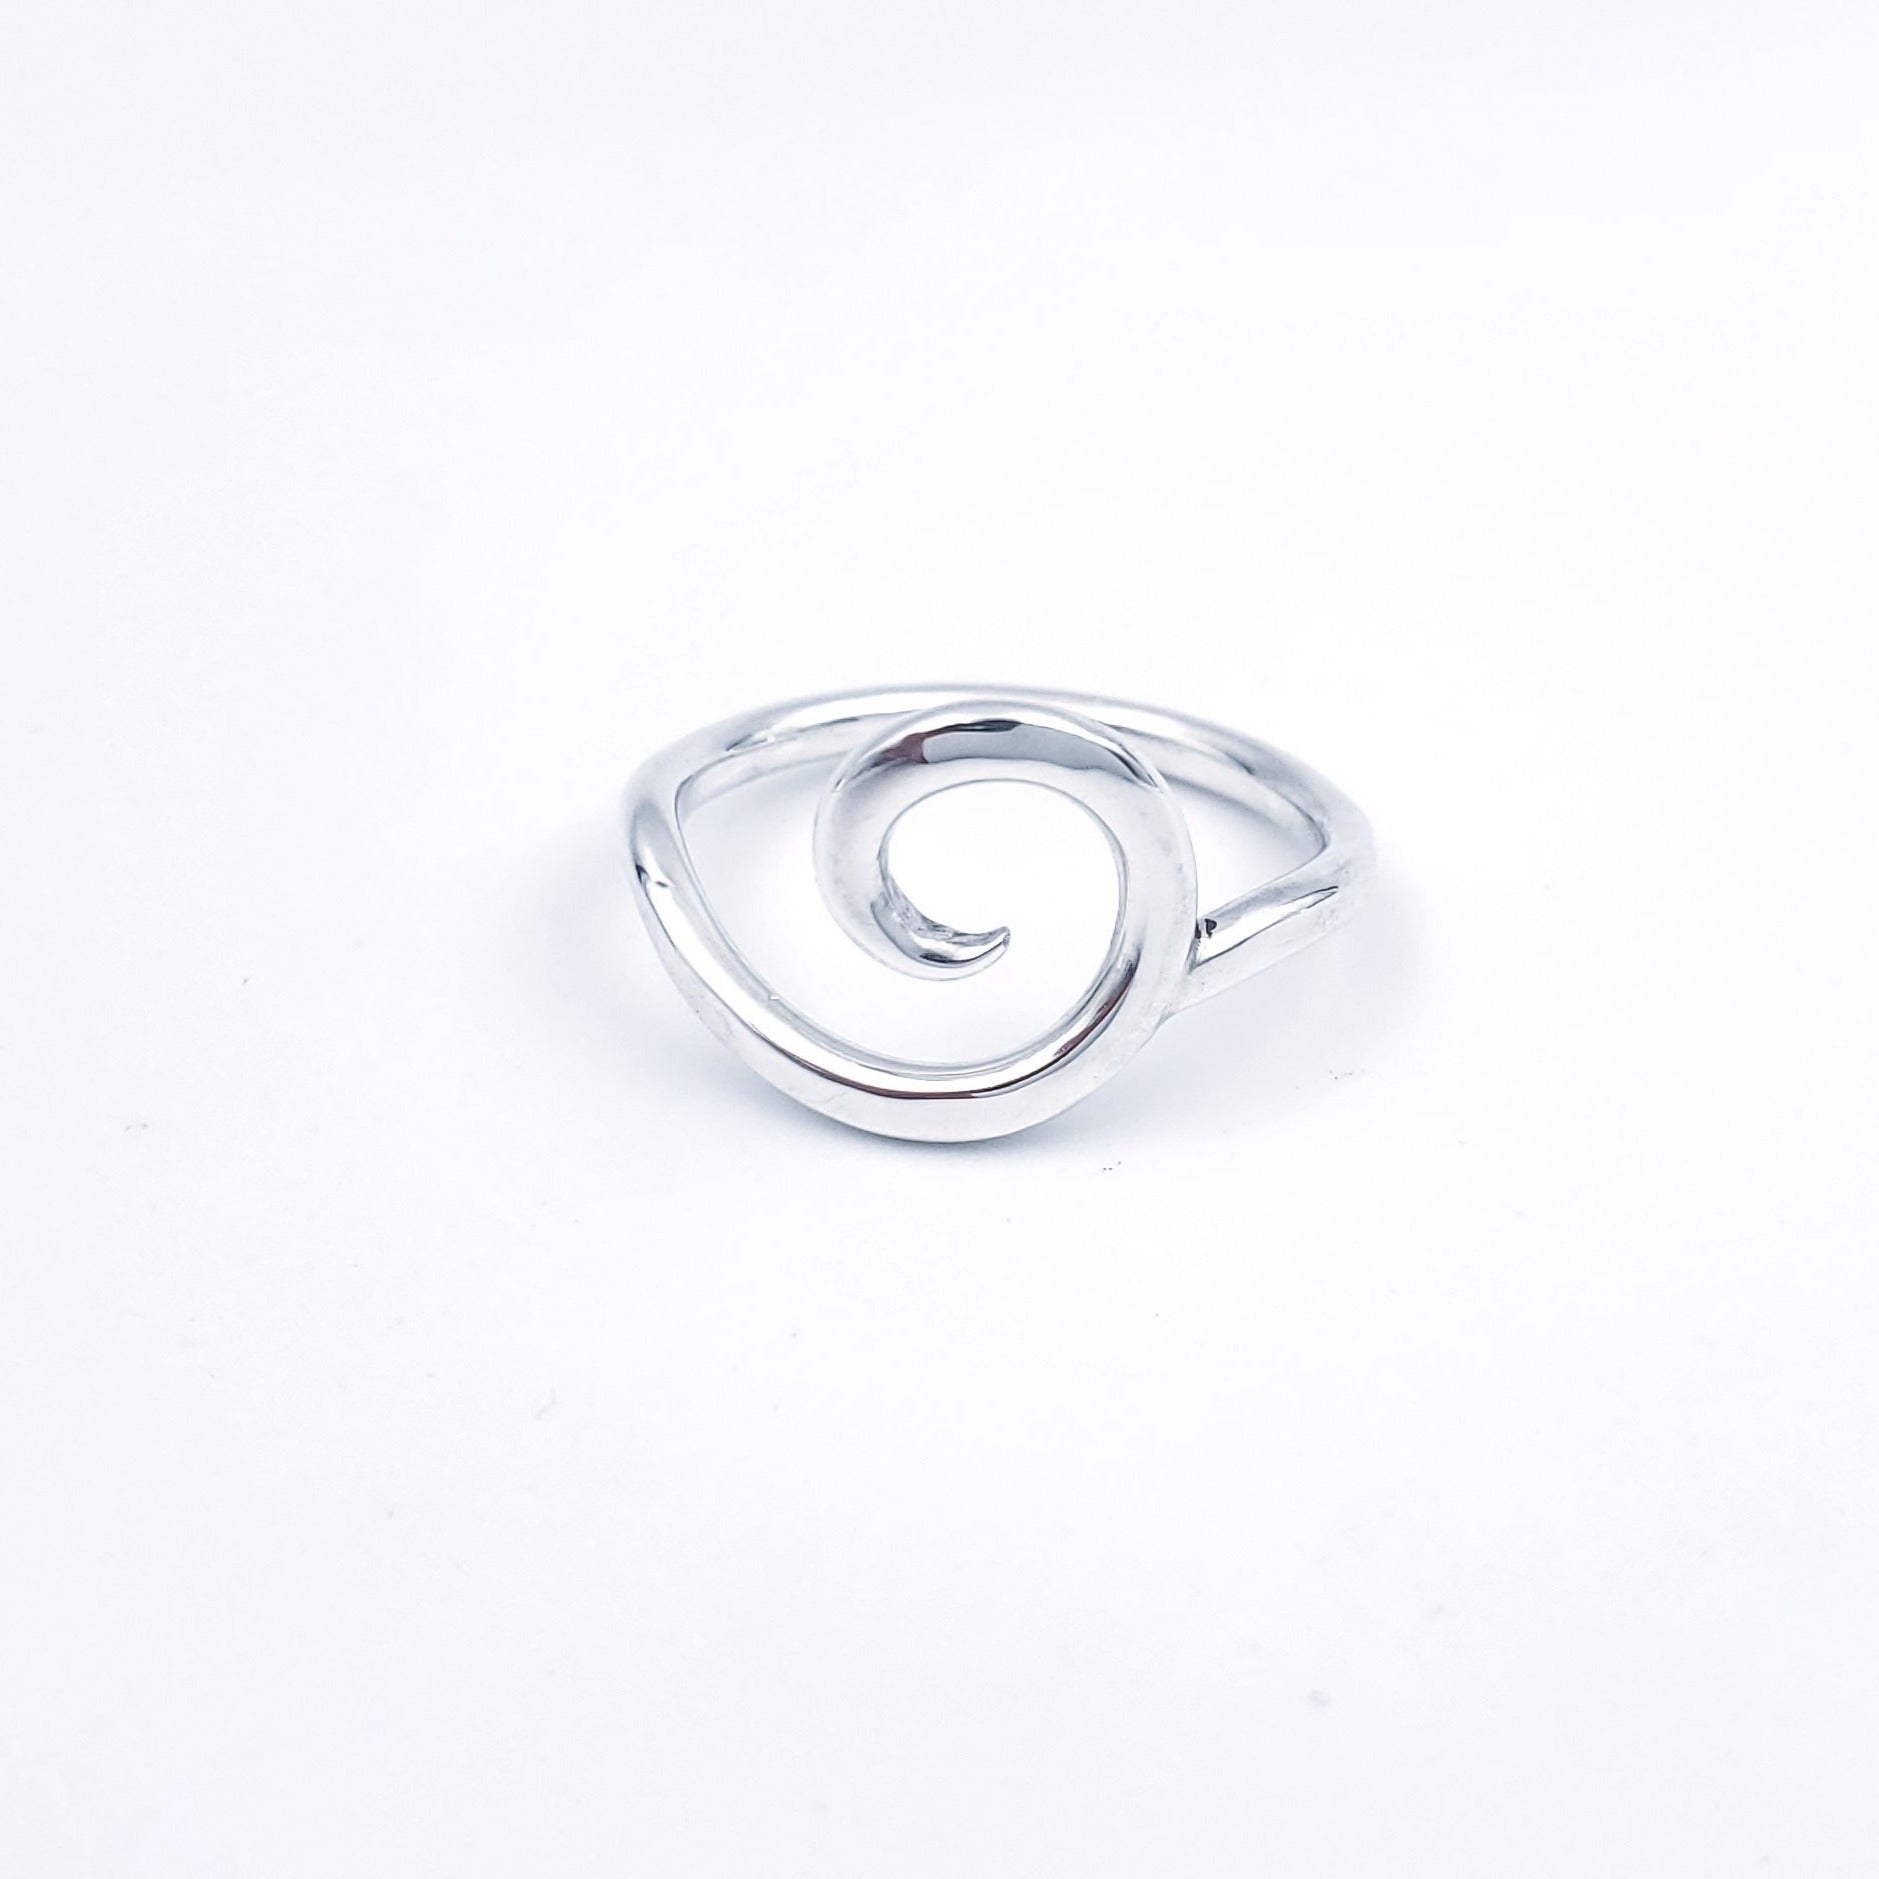 Spiral Ring in Sterling Silver, Spiral Ring, Silver Swirl | Handmade sterling  silver rings, Silver swirl, Silver rings